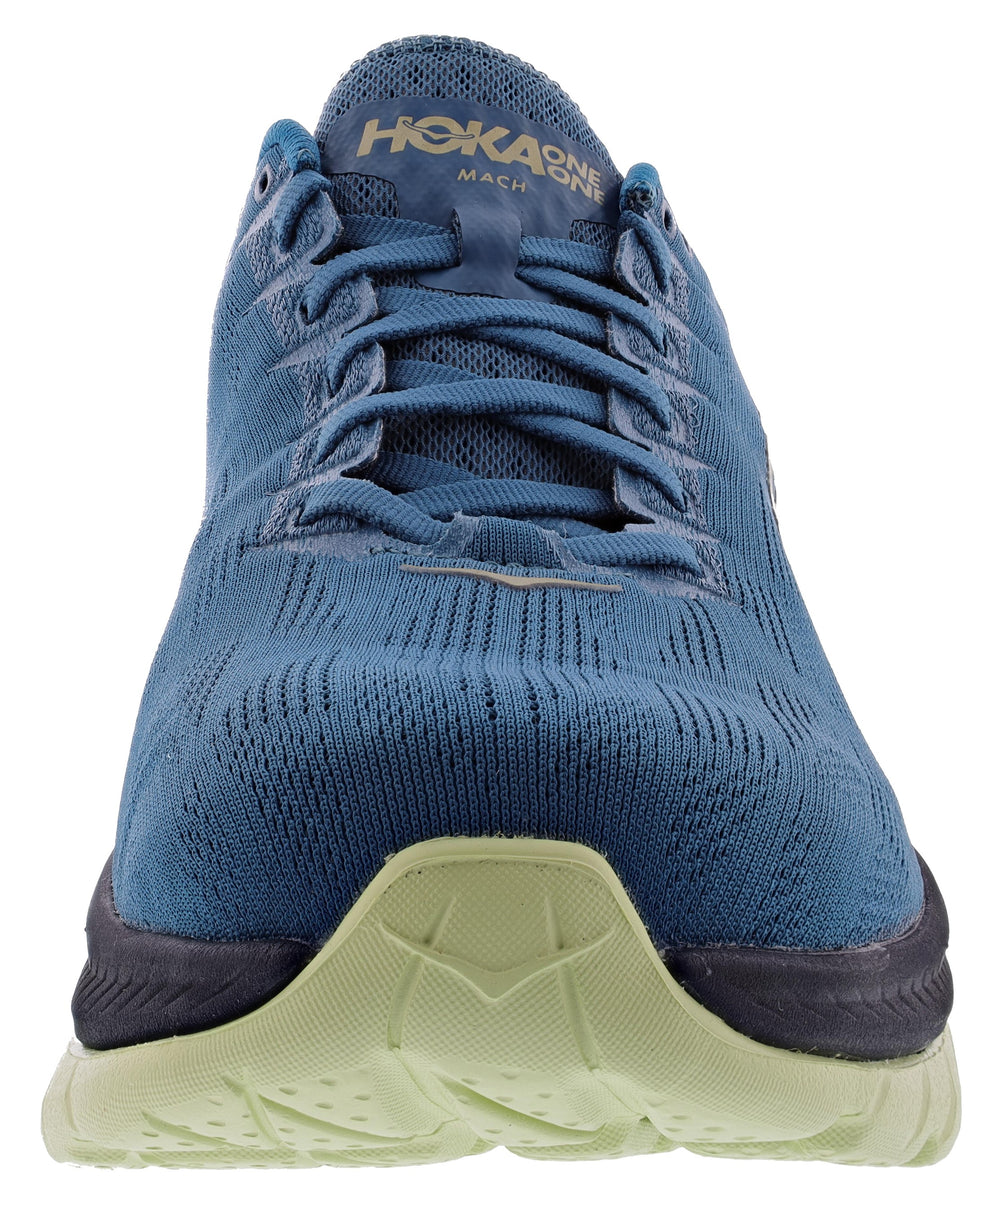 Hoka One One Men's Mach X Running Sneaker Shoes, Size 12 D(M) US